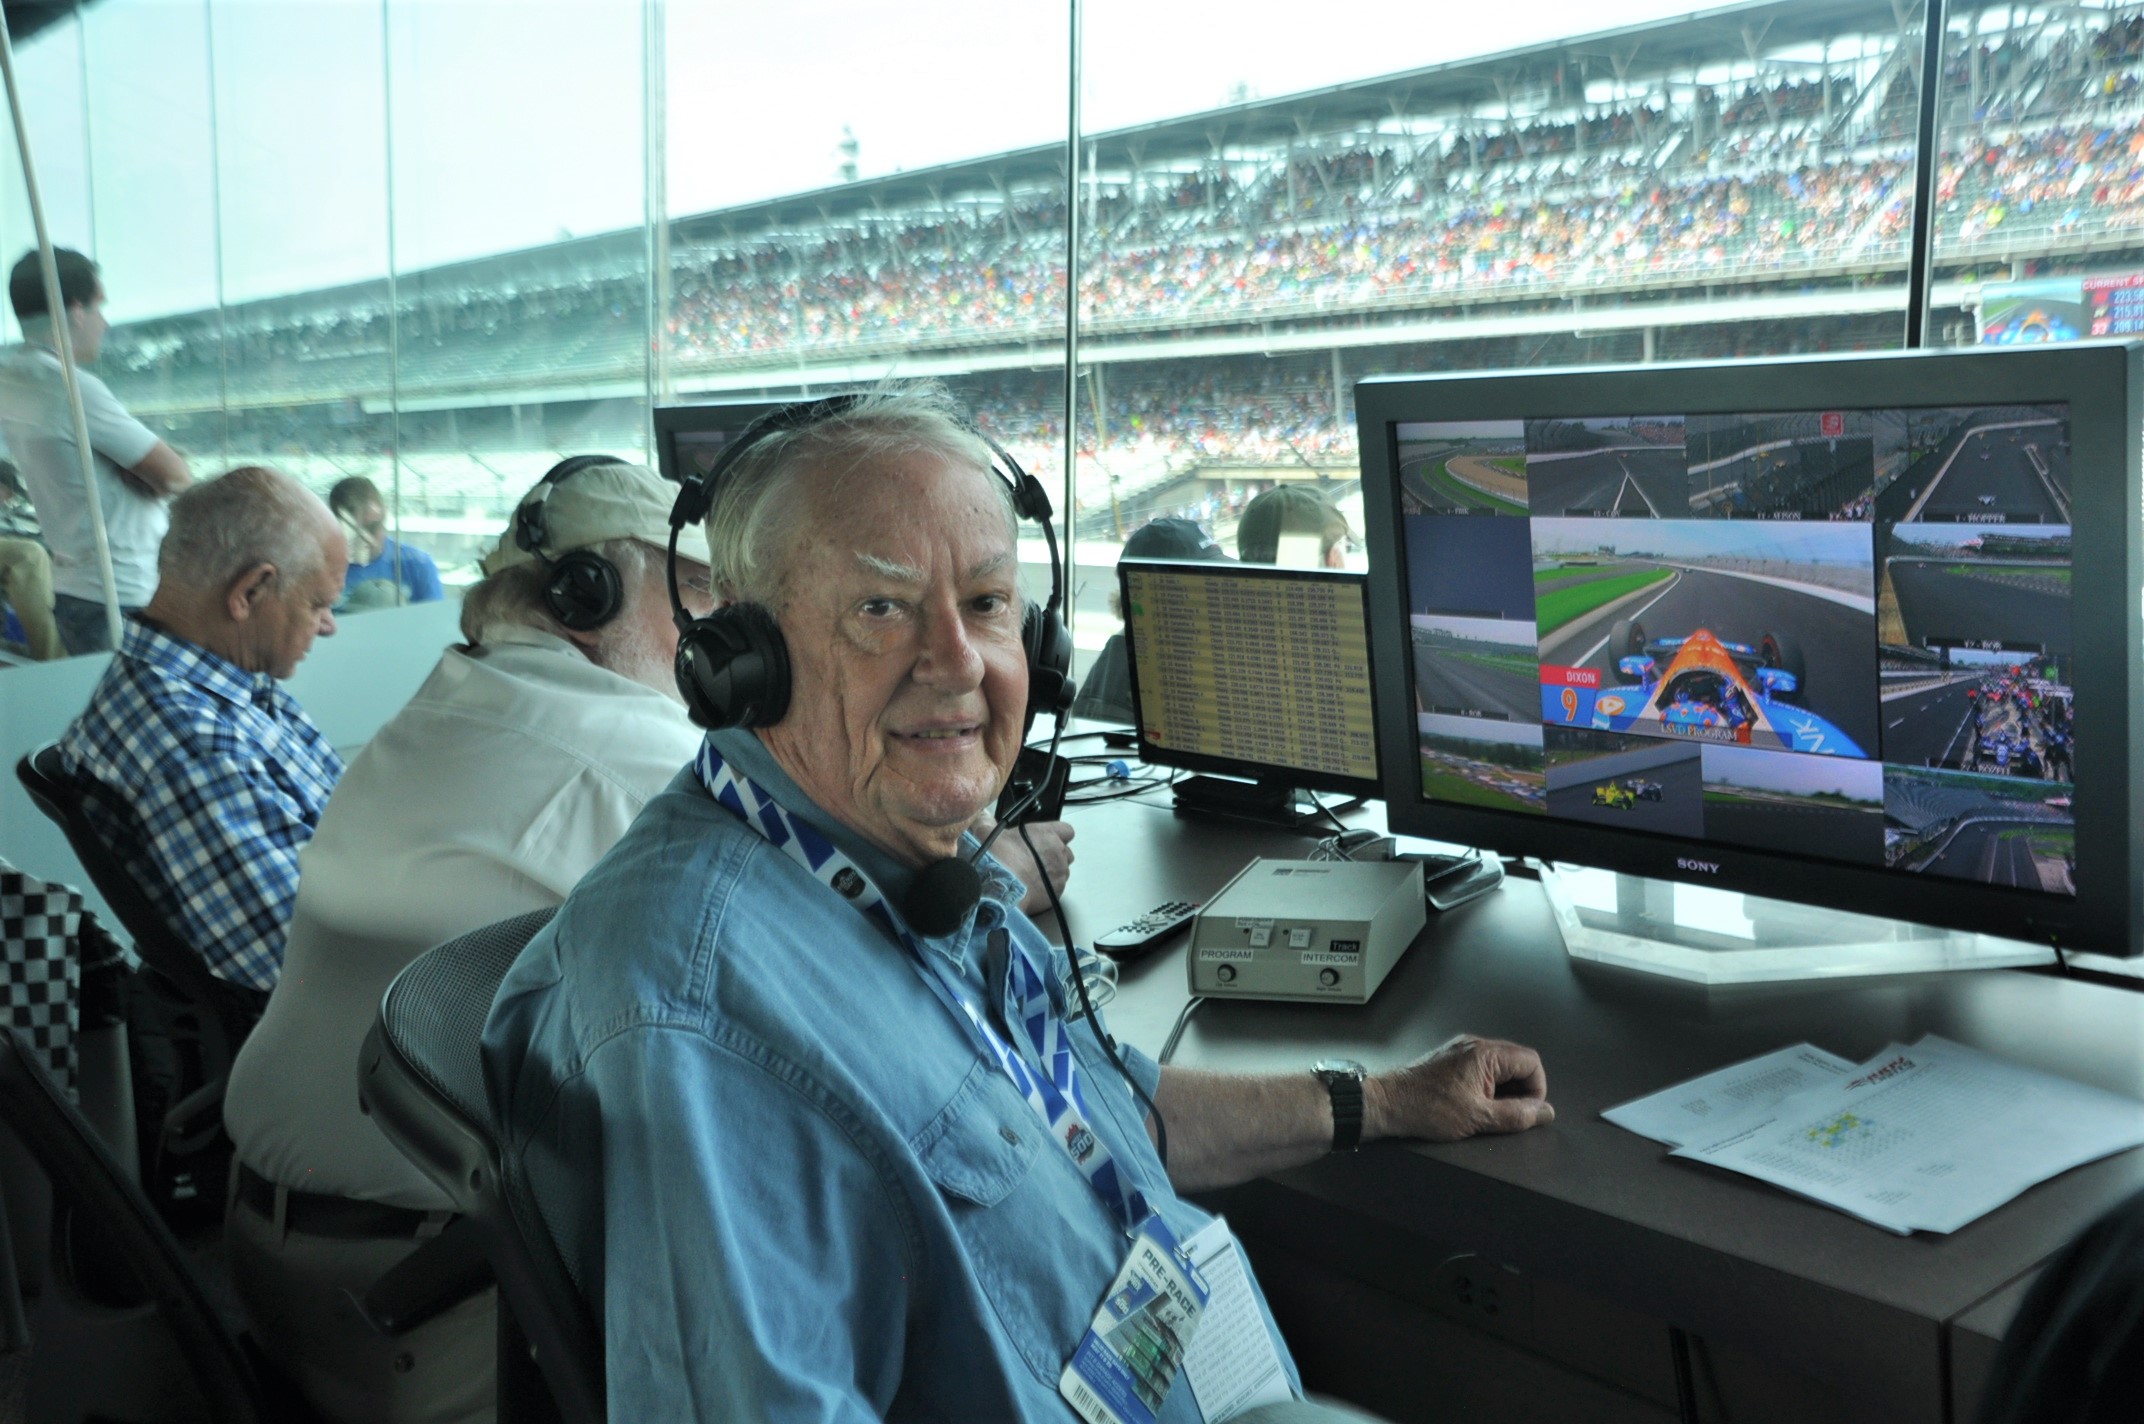 Dennis Newlyn was a guest on the worldwide Indianapolis Motor Speedway Radio Network in the build up to the 2019 Indianapolis 500.